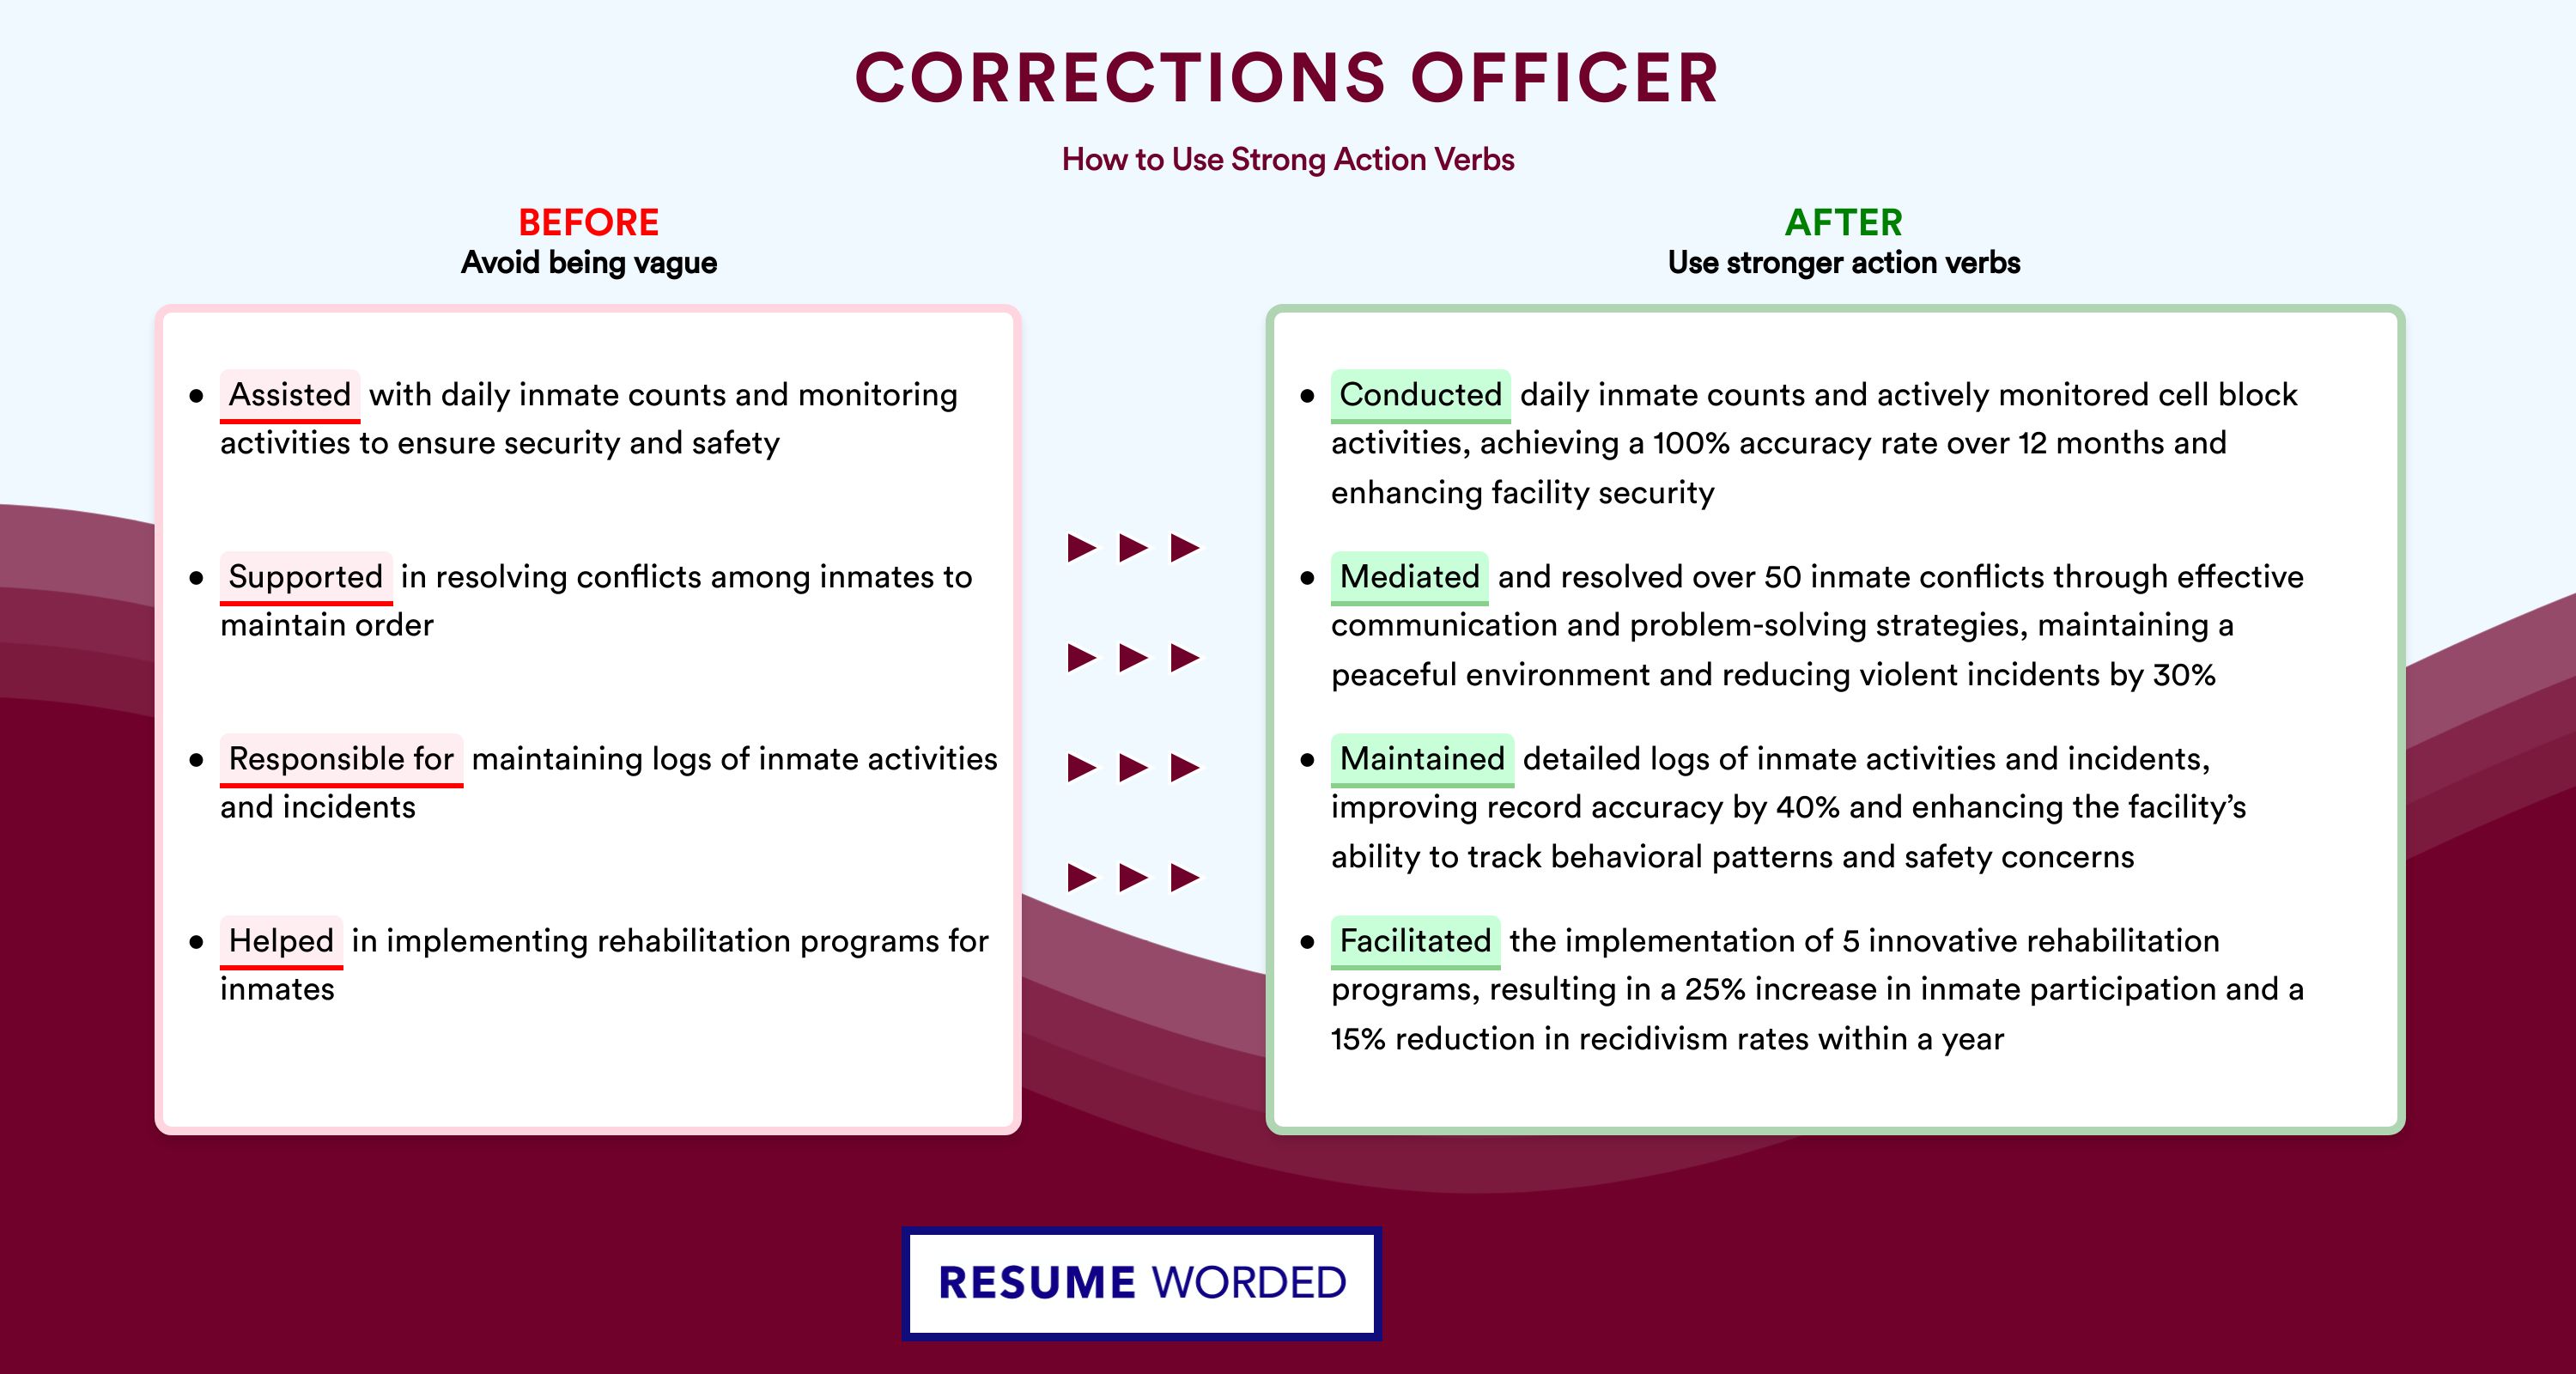 Action Verbs for Corrections Officer